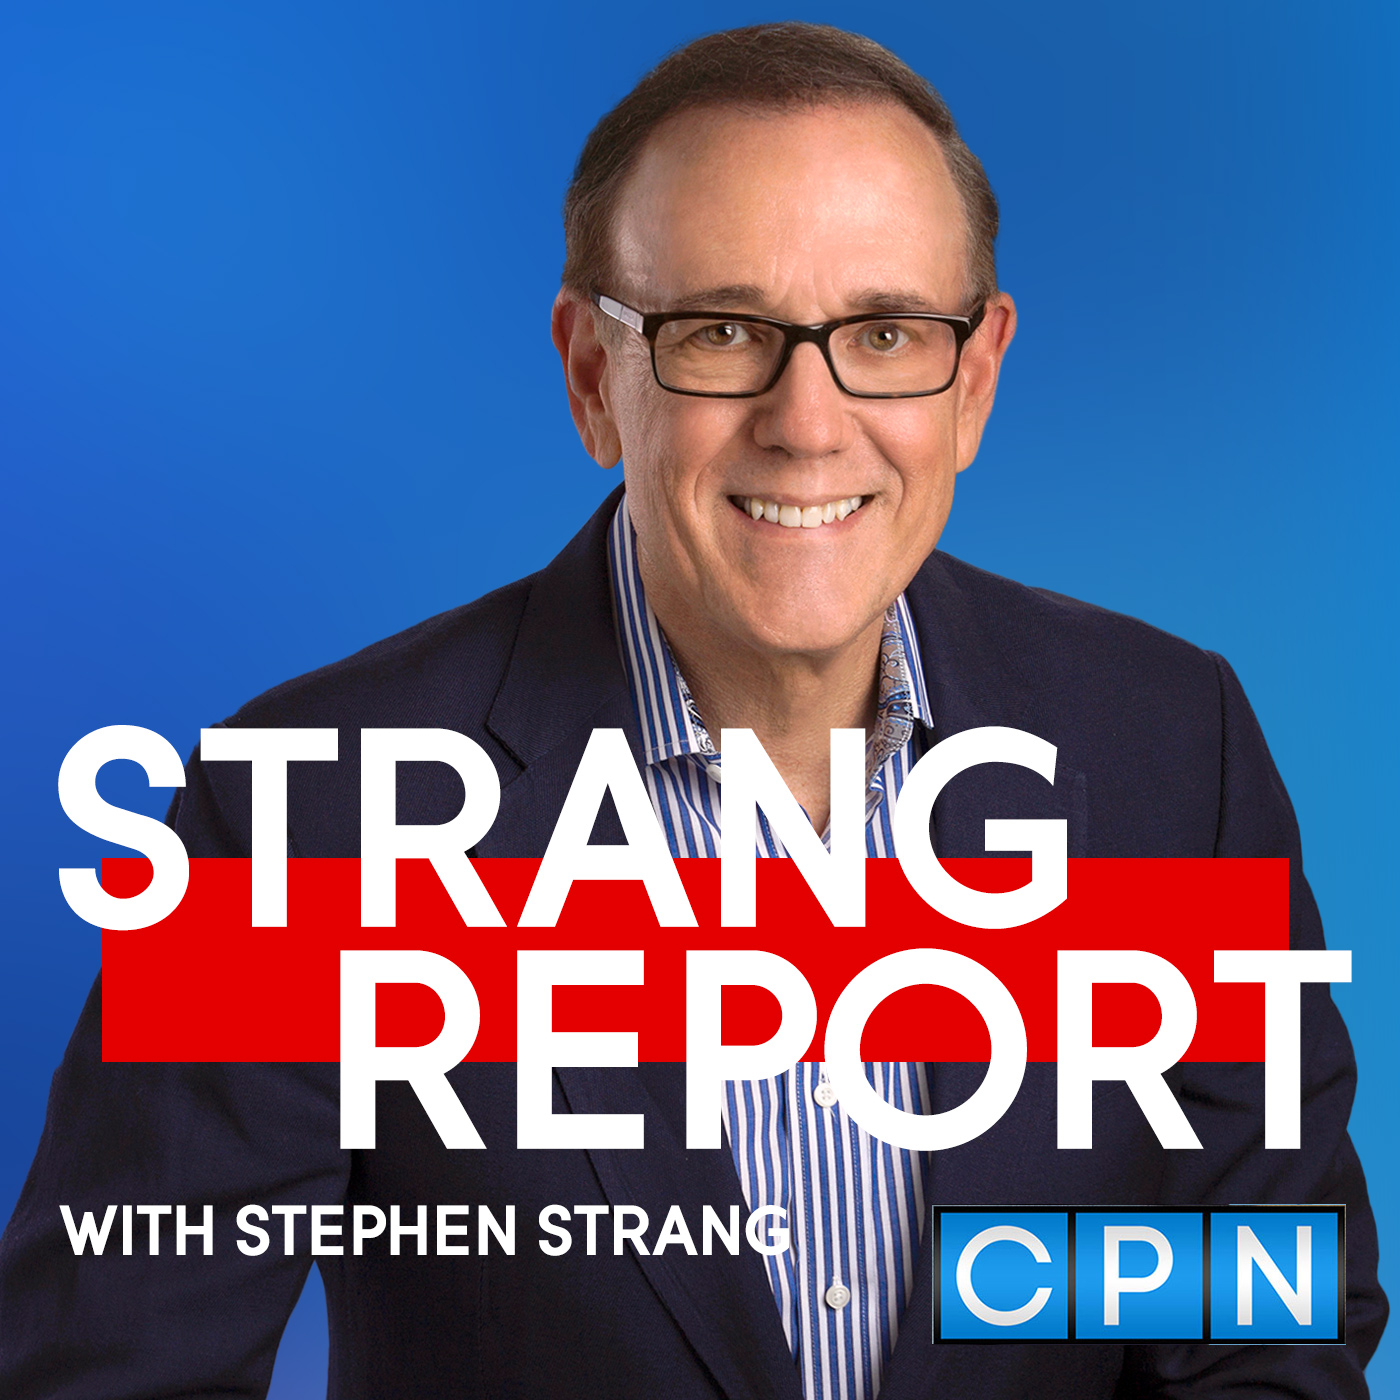 Stephen Strang makes a guest appearance on the 700 Club to discuss his new book!